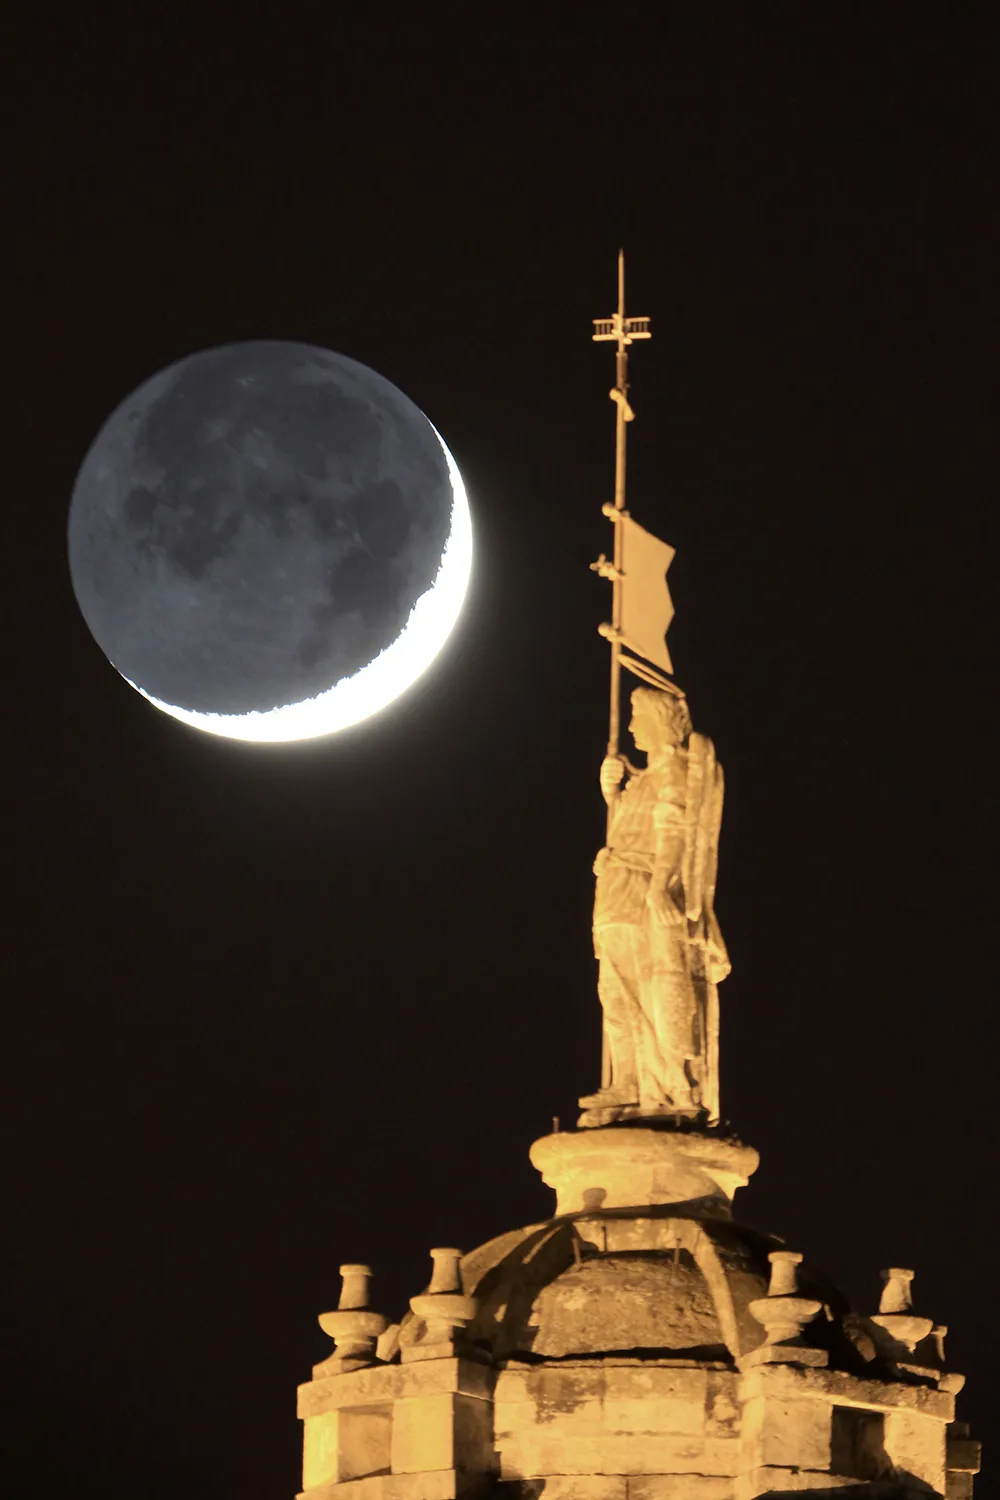 St. Raphael and the Moon by Paco Bellido, Cordoba, Spain. Equipment: Canon EOS 550D, Sky Watcher ED80 refractor.